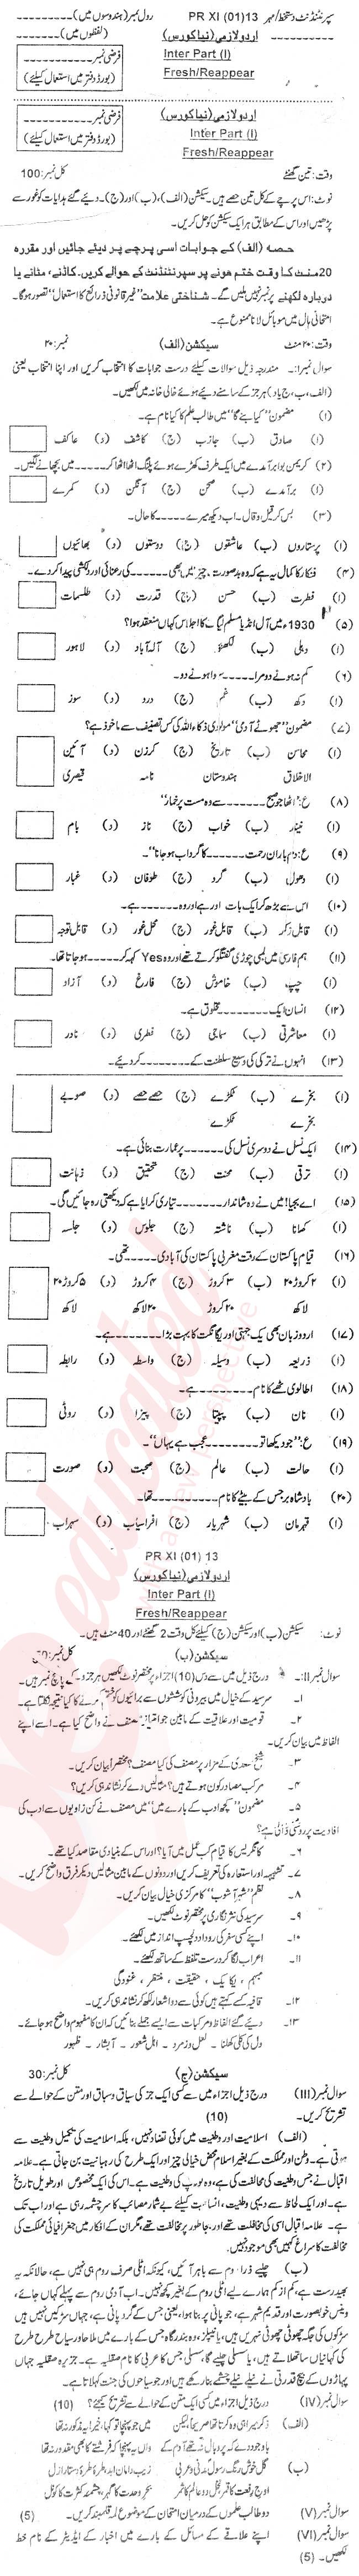 Urdu 11th class Past Paper Group 1 BISE Abbottabad 2013